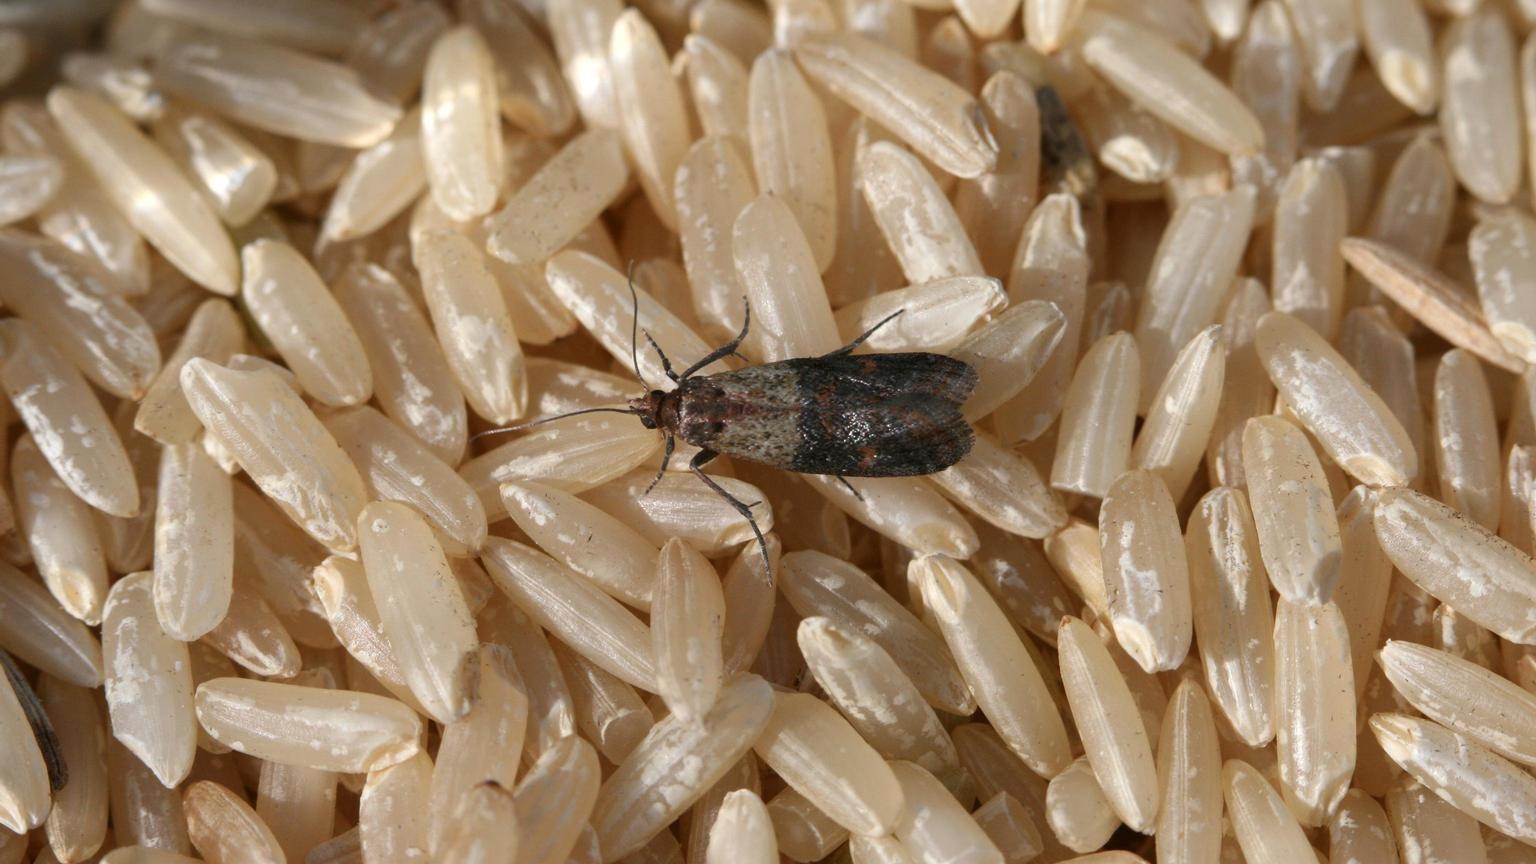 Identifying Common Household Insect Pests | University of Maryland ...